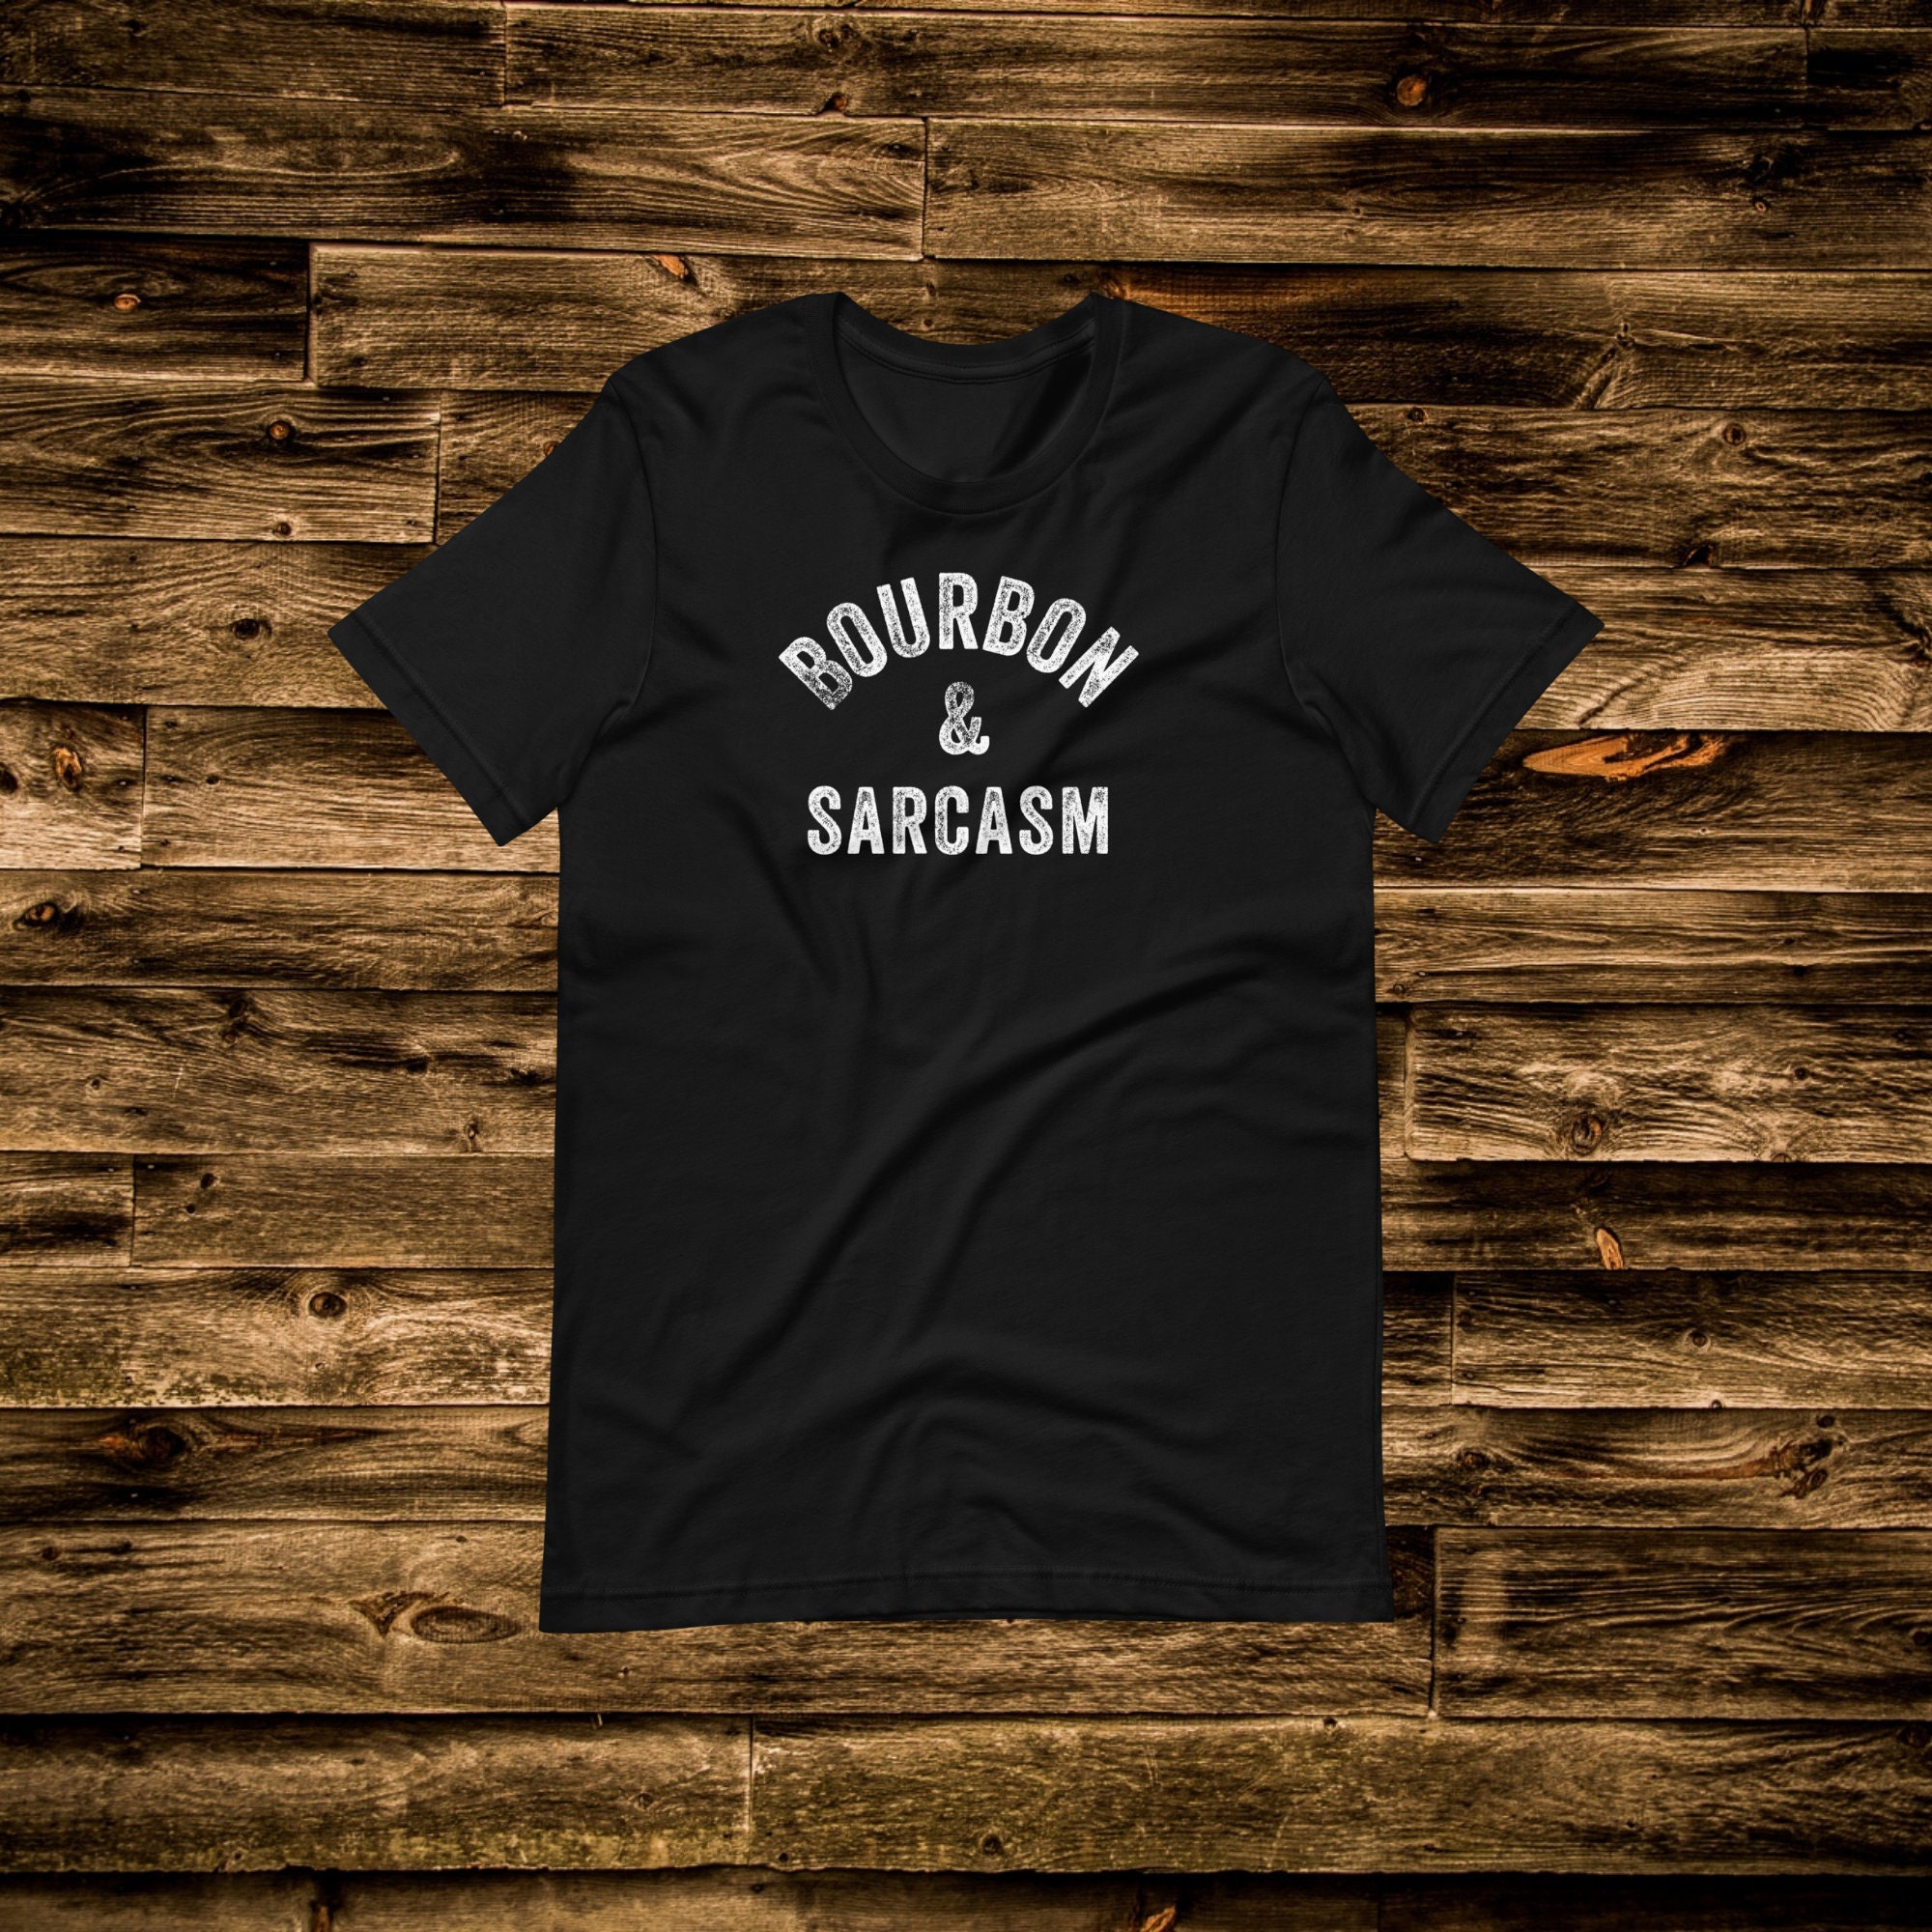 Gift for Him |Gift for Her Funny Bourbon Drinker Gift Bourbon Drinker Shirt| Gift For Bourbon Lover May Contain Bourbon Shirt